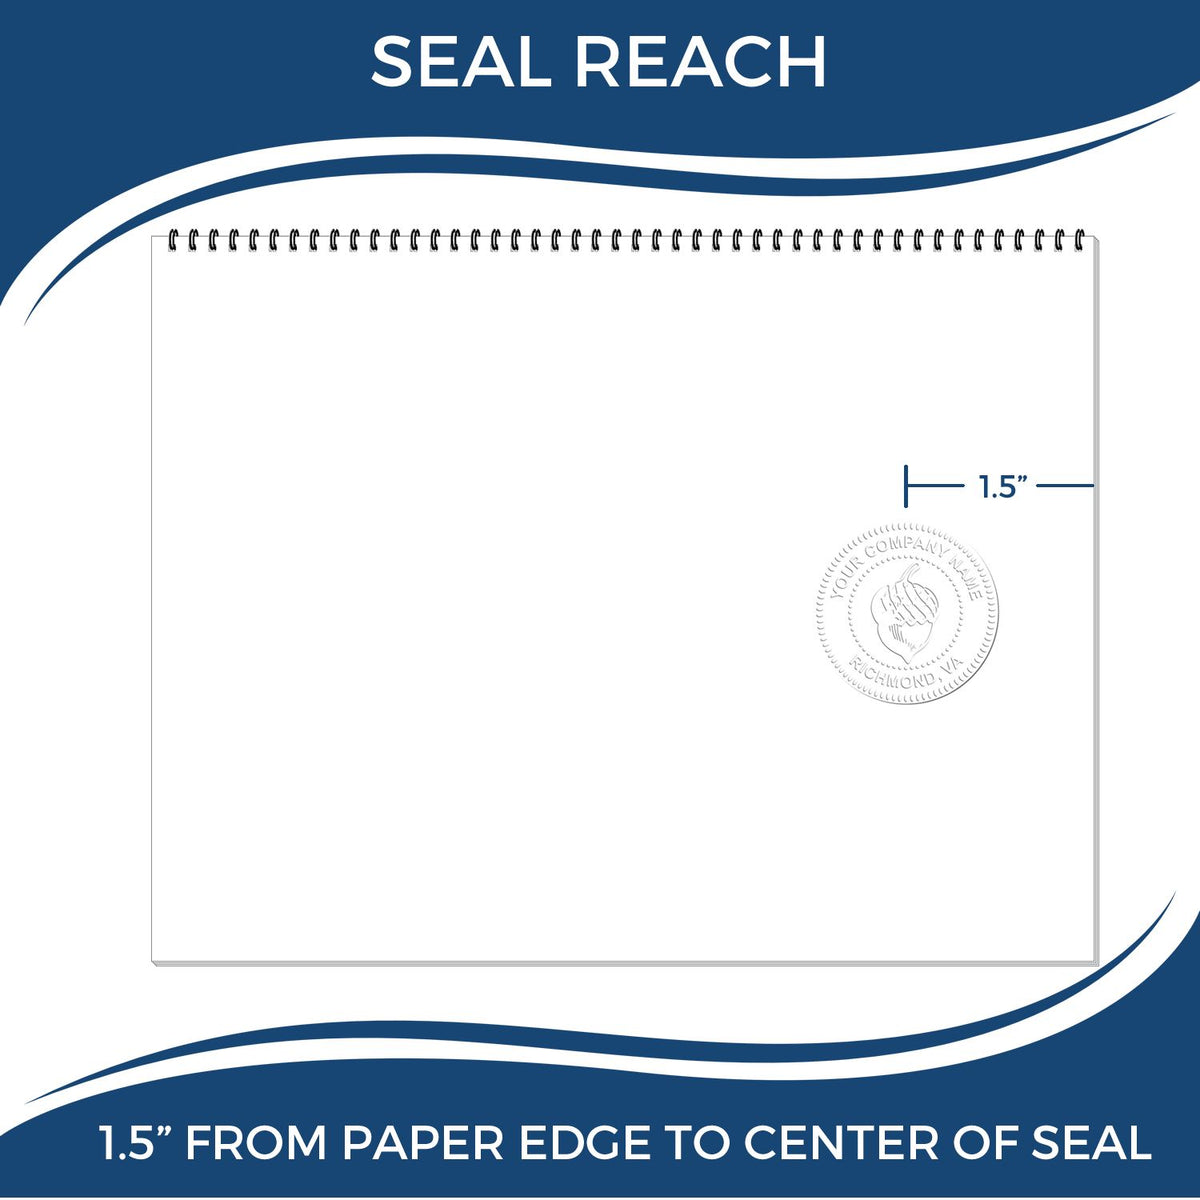 An infographic showing the seal reach which is represented by a ruler and a miniature seal image of the Hybrid Wisconsin Geologist Seal